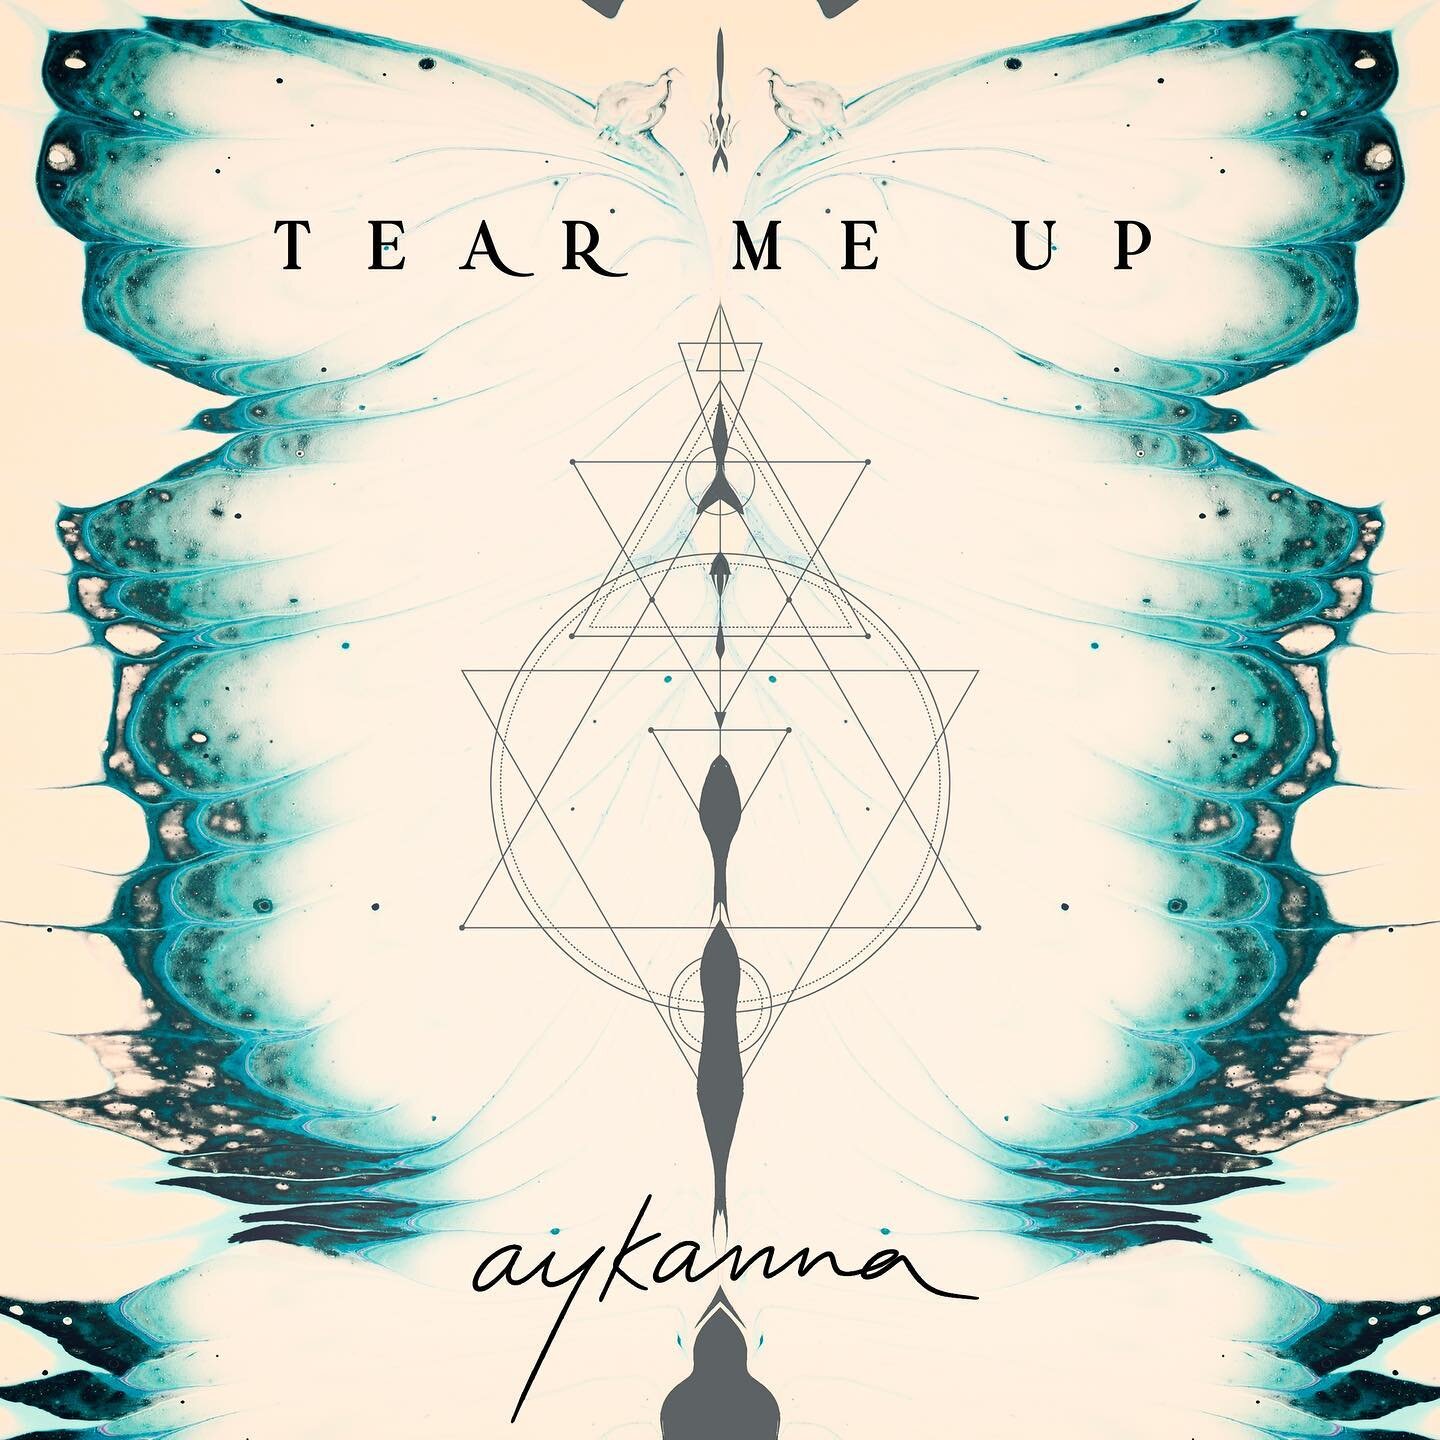 BIG ANNOUNCEMENT

Aykanna releases their first new single in three years called &quot;Tear Me Up&quot; on September 16th to honor and support  Suicide Prevention Month. 

This song came to @paulinedrossart as a vision of her brother&rsquo;s last conv